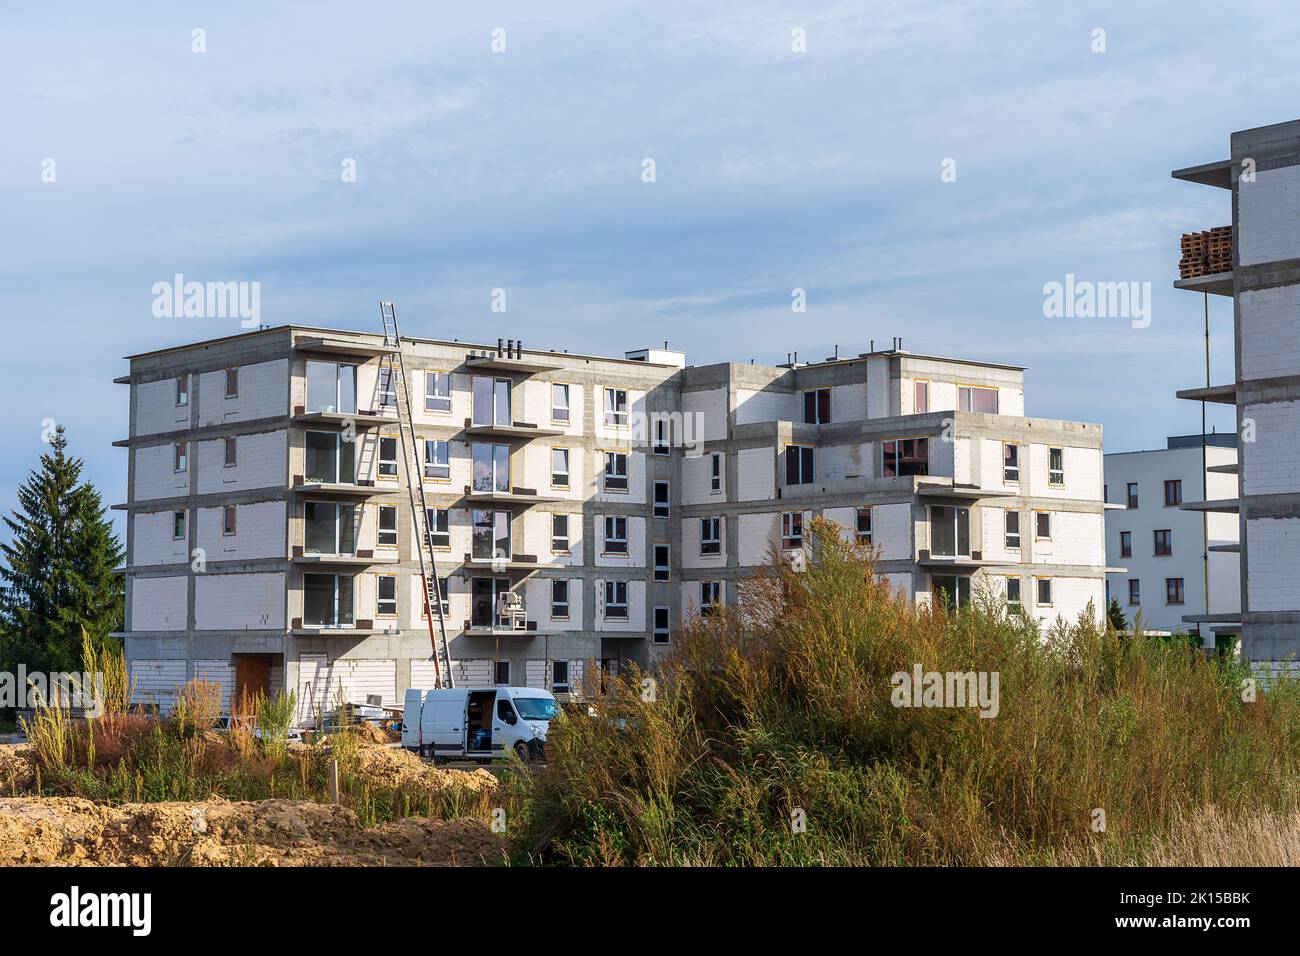 Construction of a housing estate with white walls.Estate under construction Stock Photo